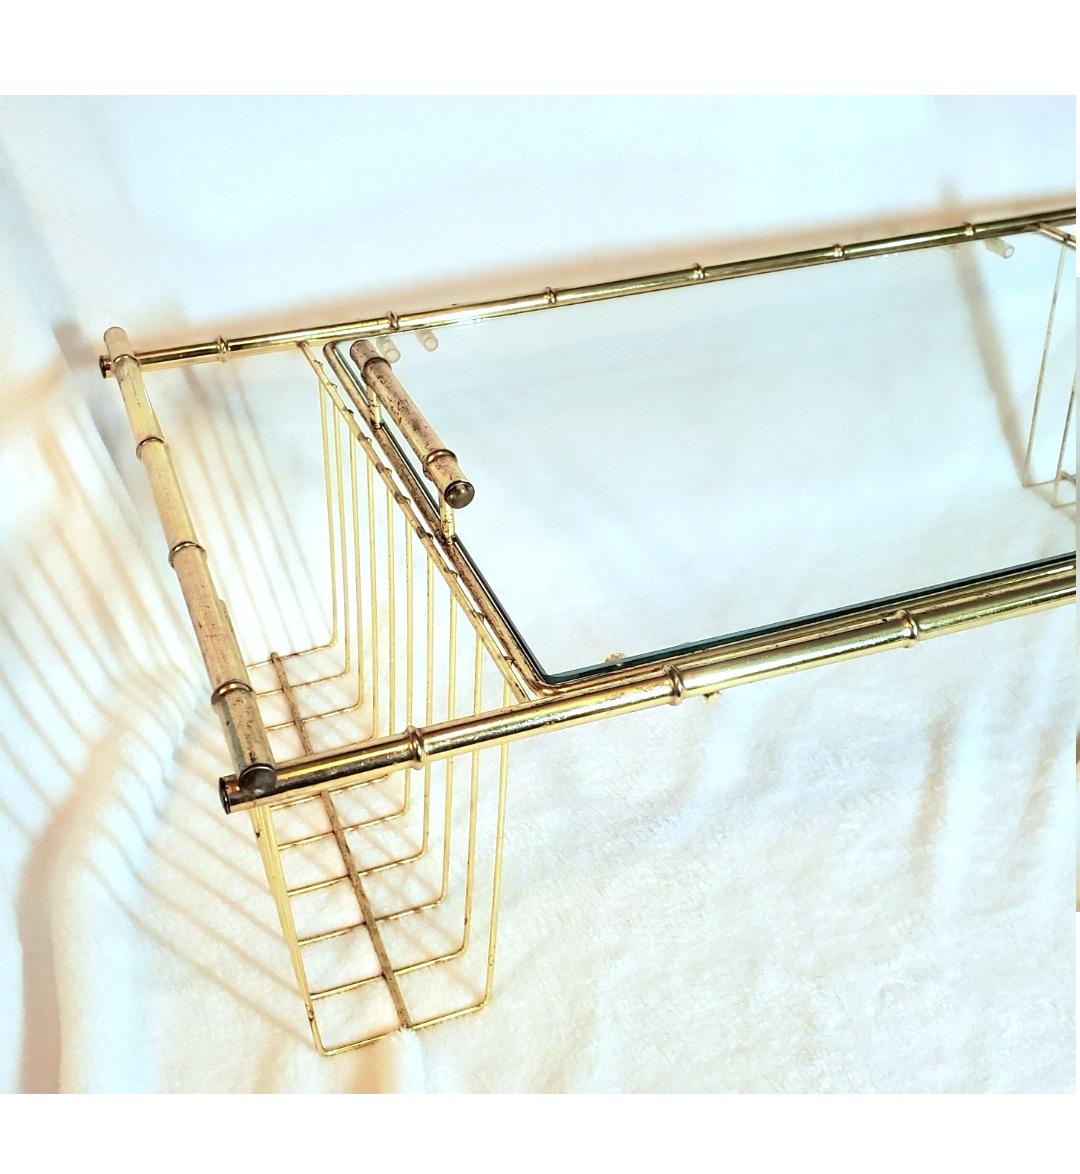 1960s Maurice Duchin Brass and Glass Breakfast Serving Tray In Good Condition For Sale In Waxahachie, TX